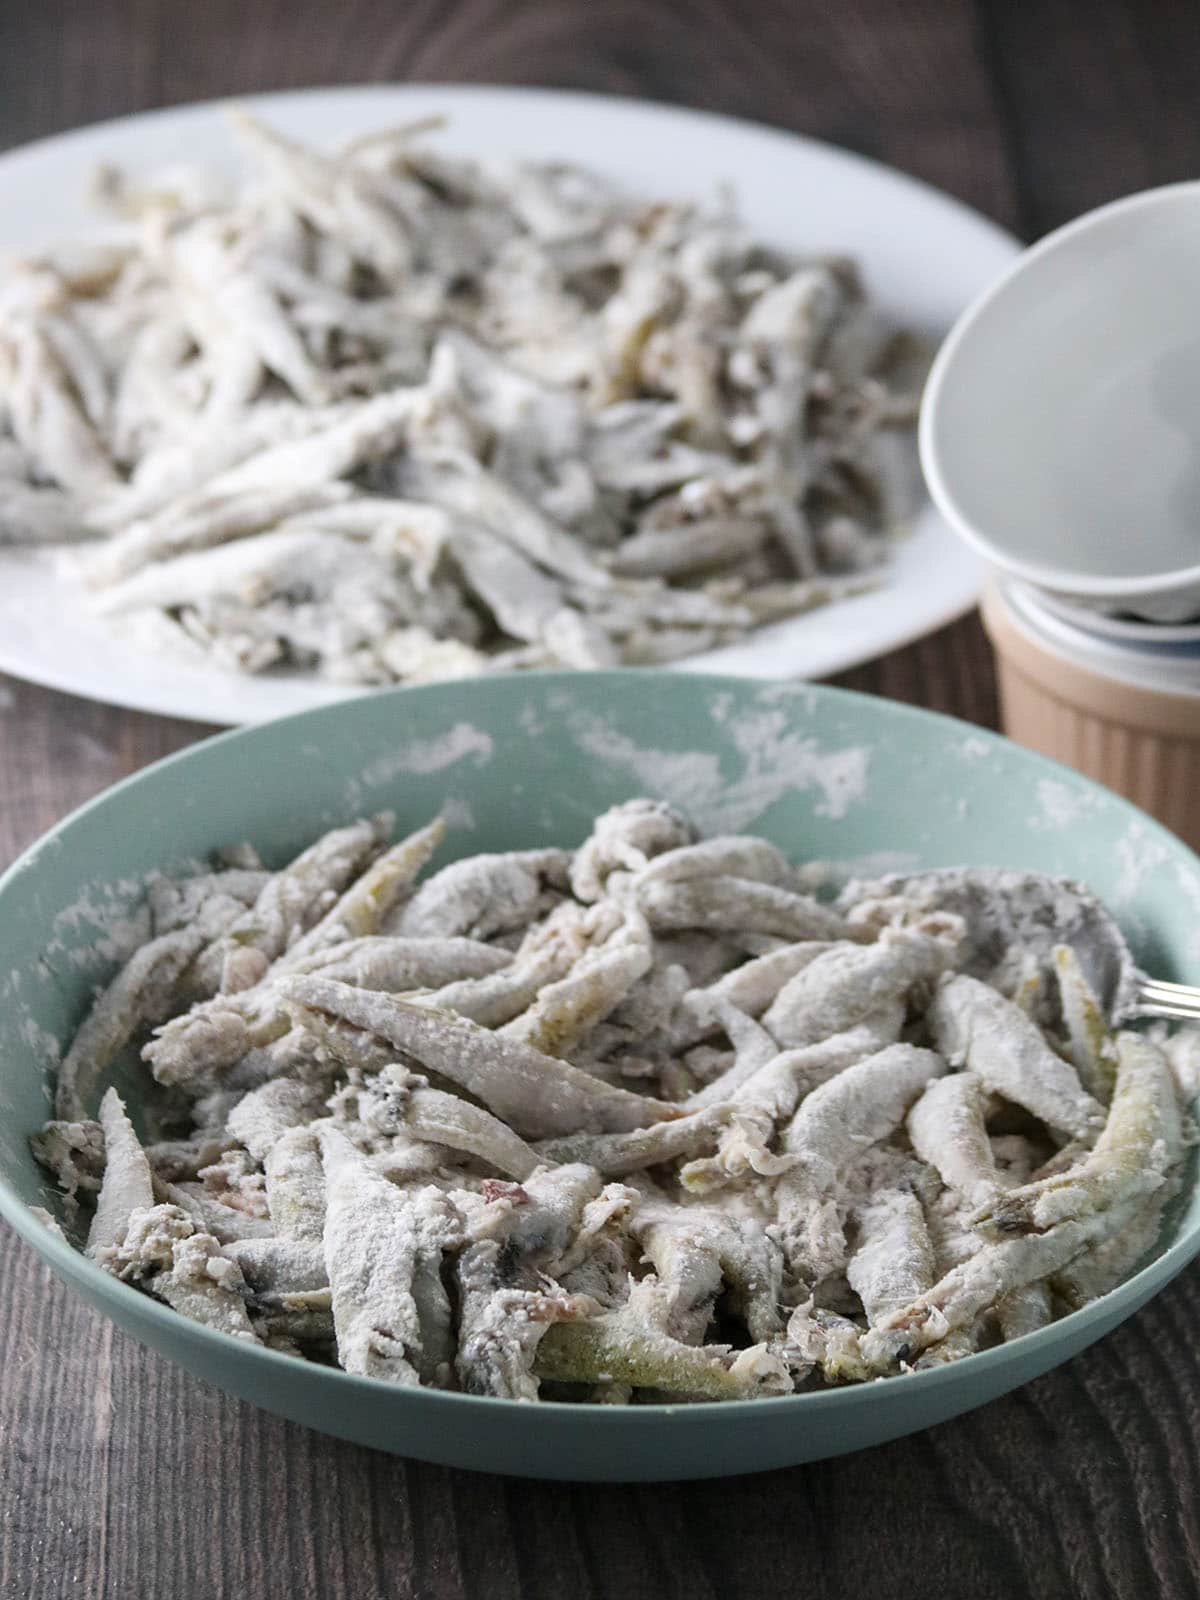 smelt fish coated in cornstarch and flour mixture in a bowl